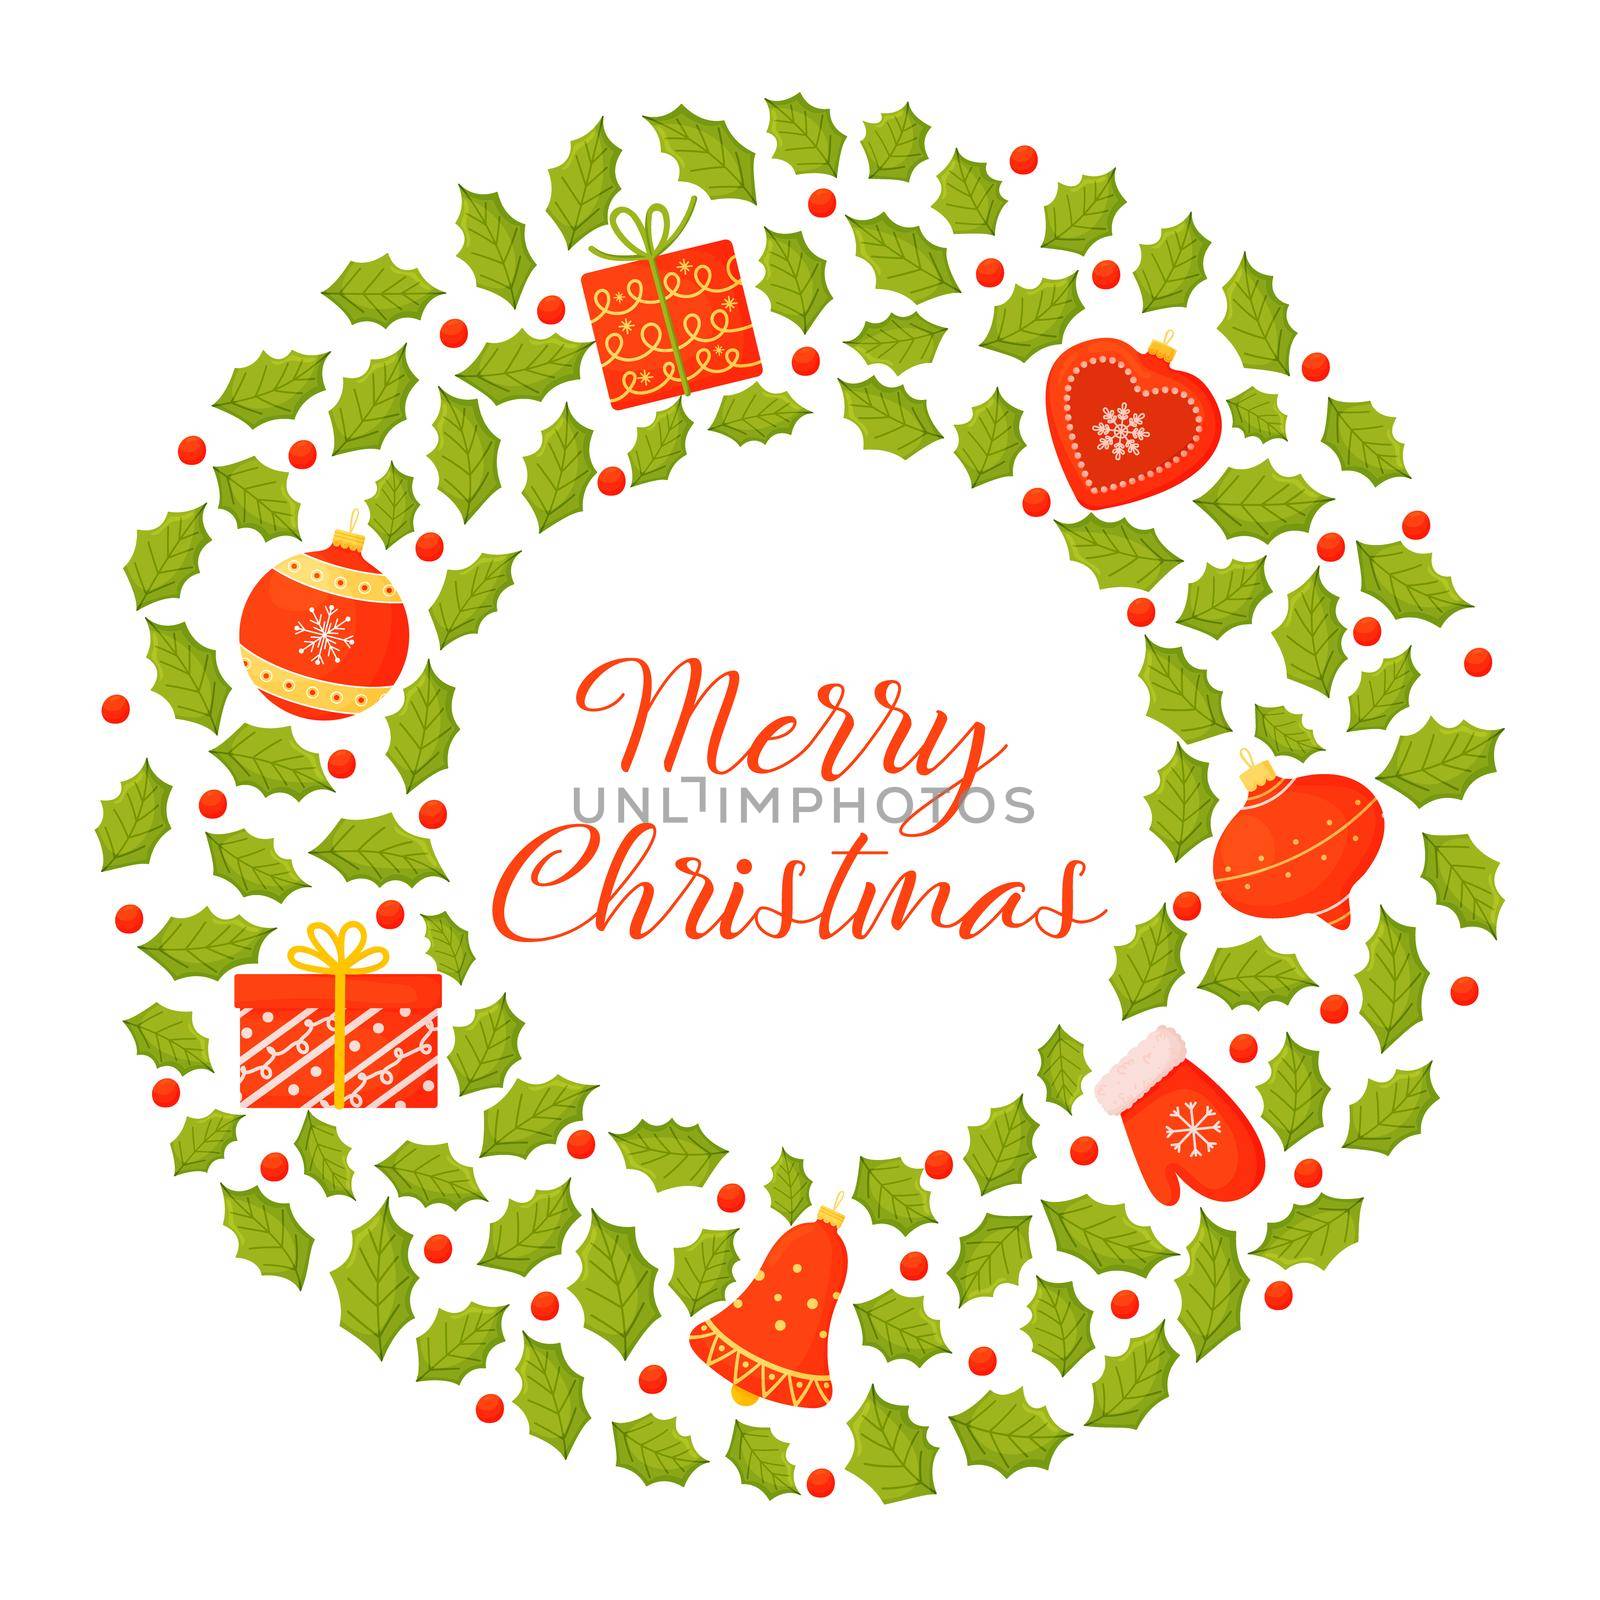 Christmas wreath vector illustration on a white background.